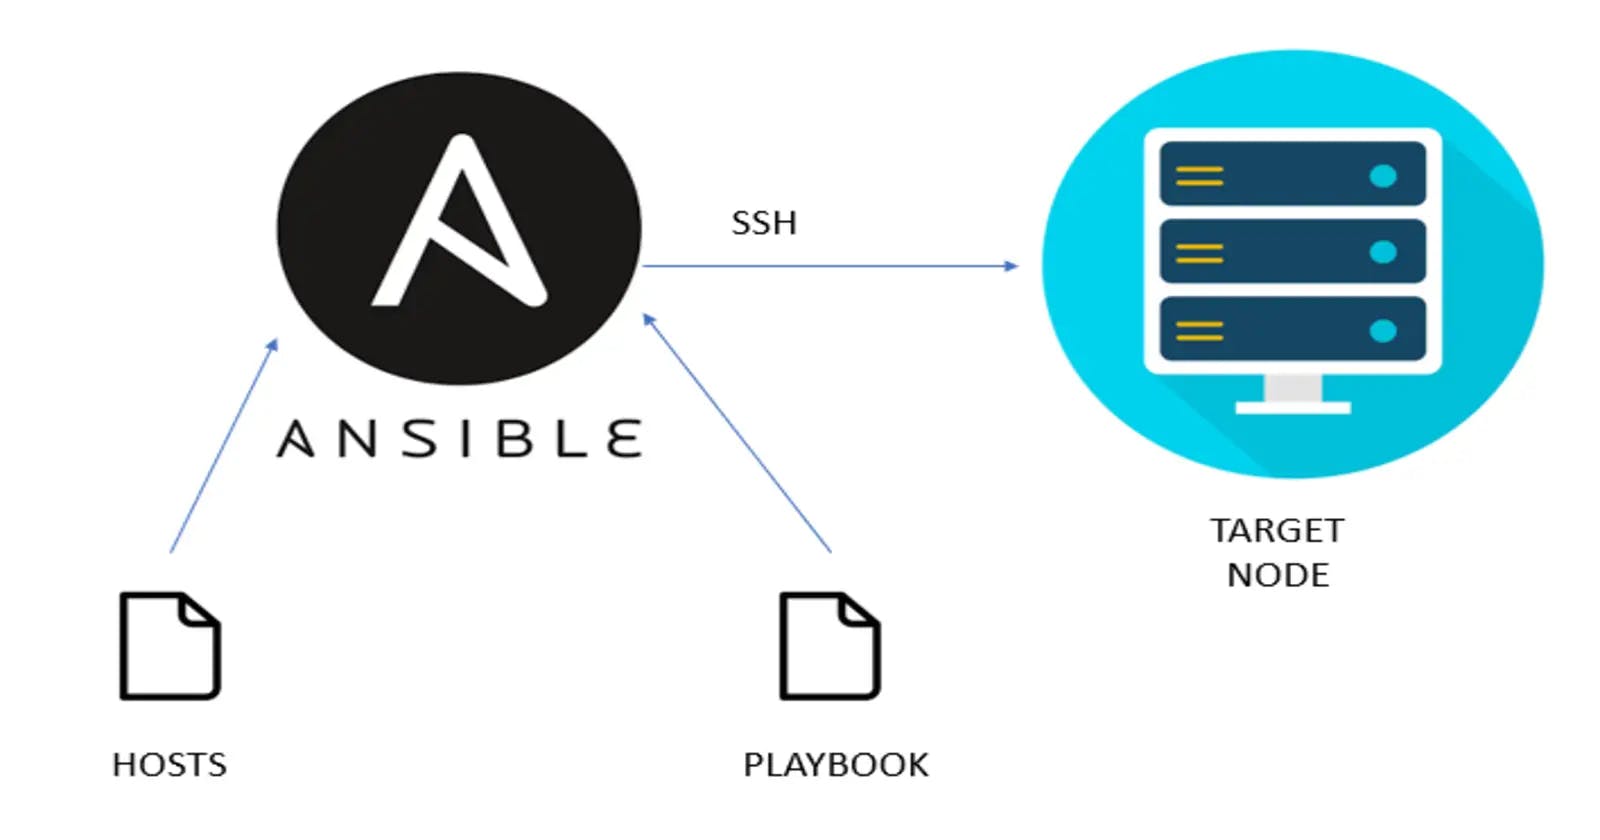 Ansible Playbook: Nginx Installation and Webpage Deployment